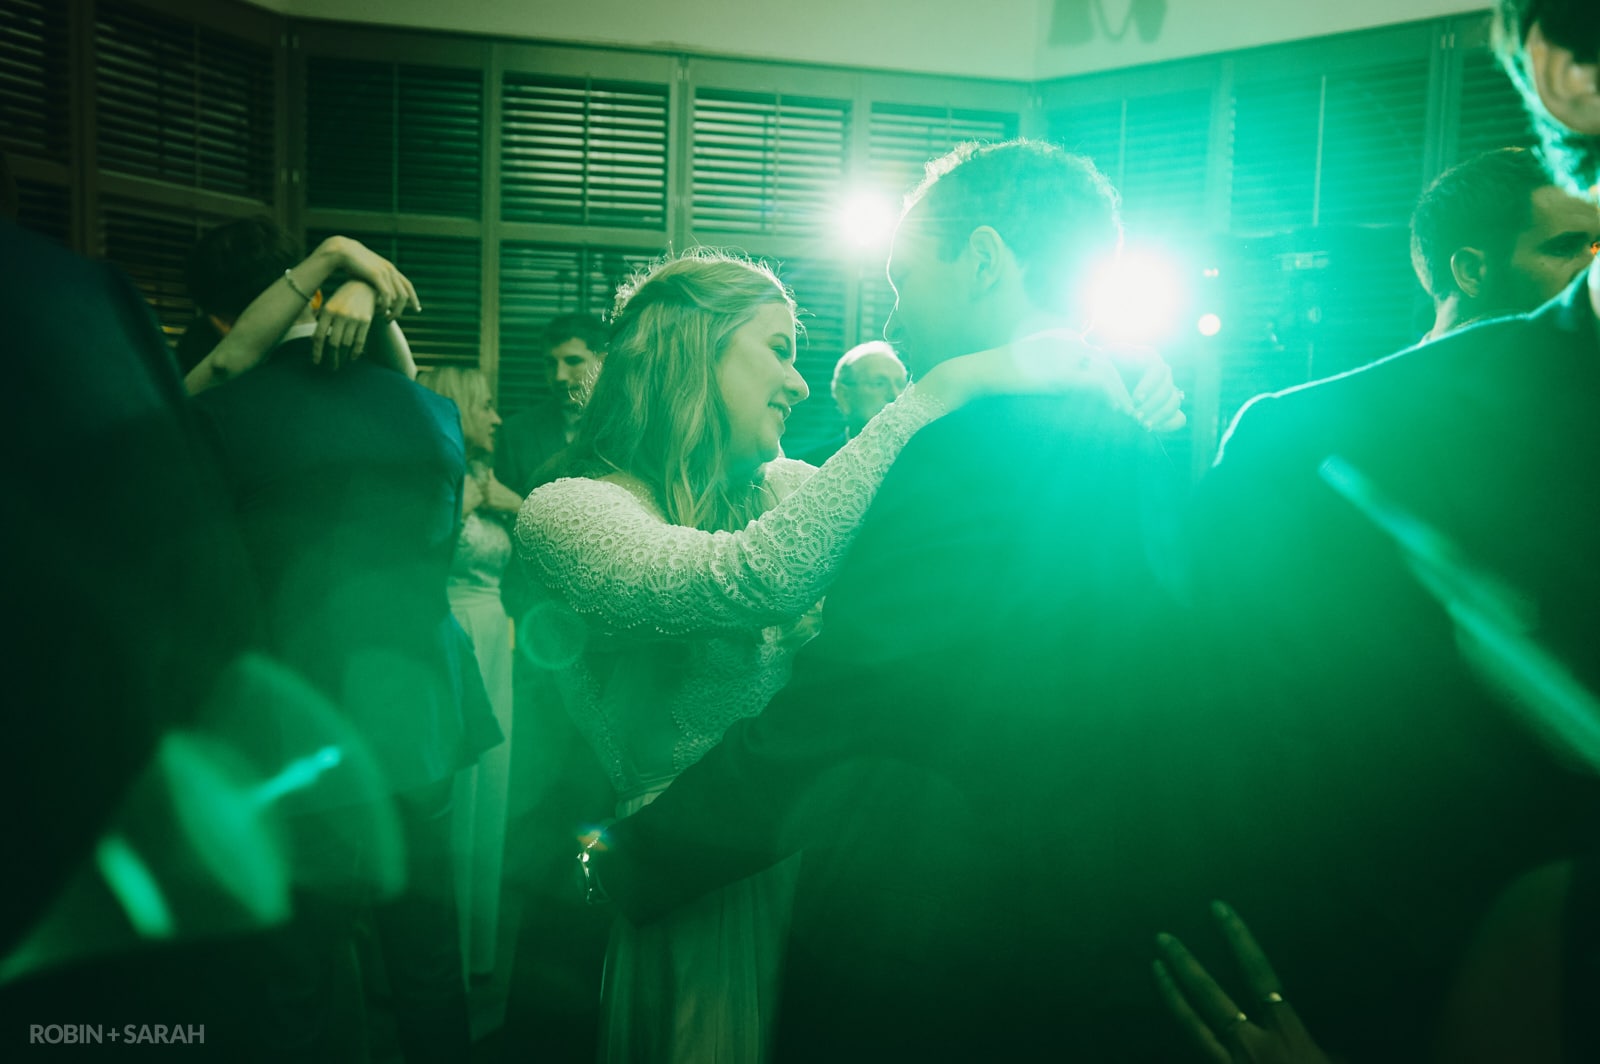 Bride and groom dancing at wedding surrounded by green lighting